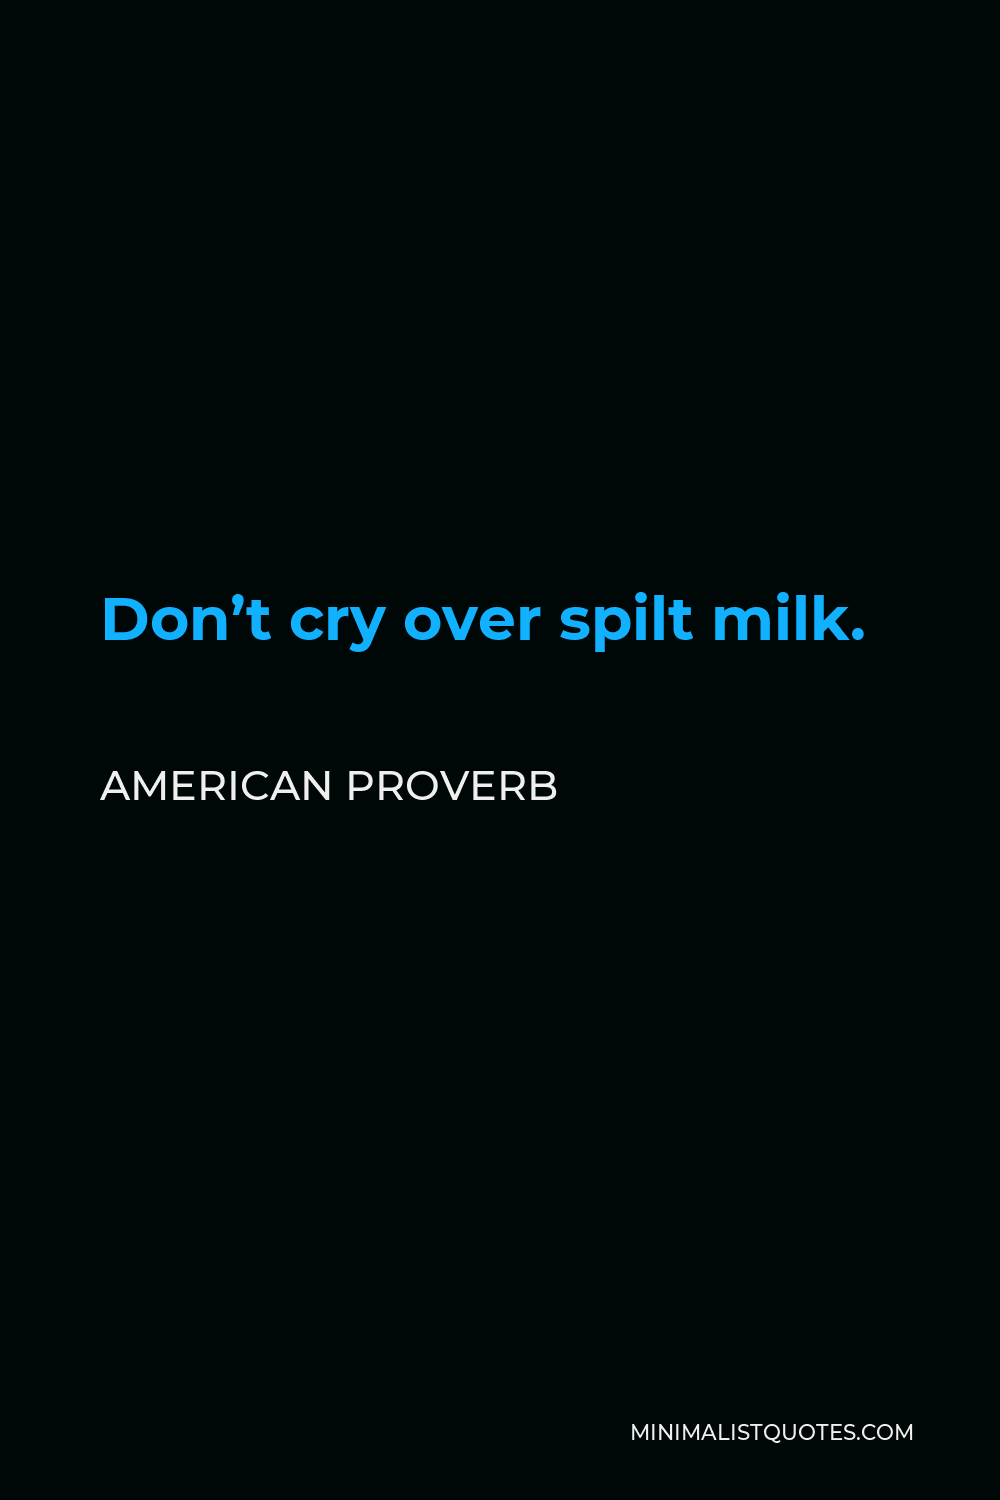 American Proverb Quote - Don’t cry over spilt milk.